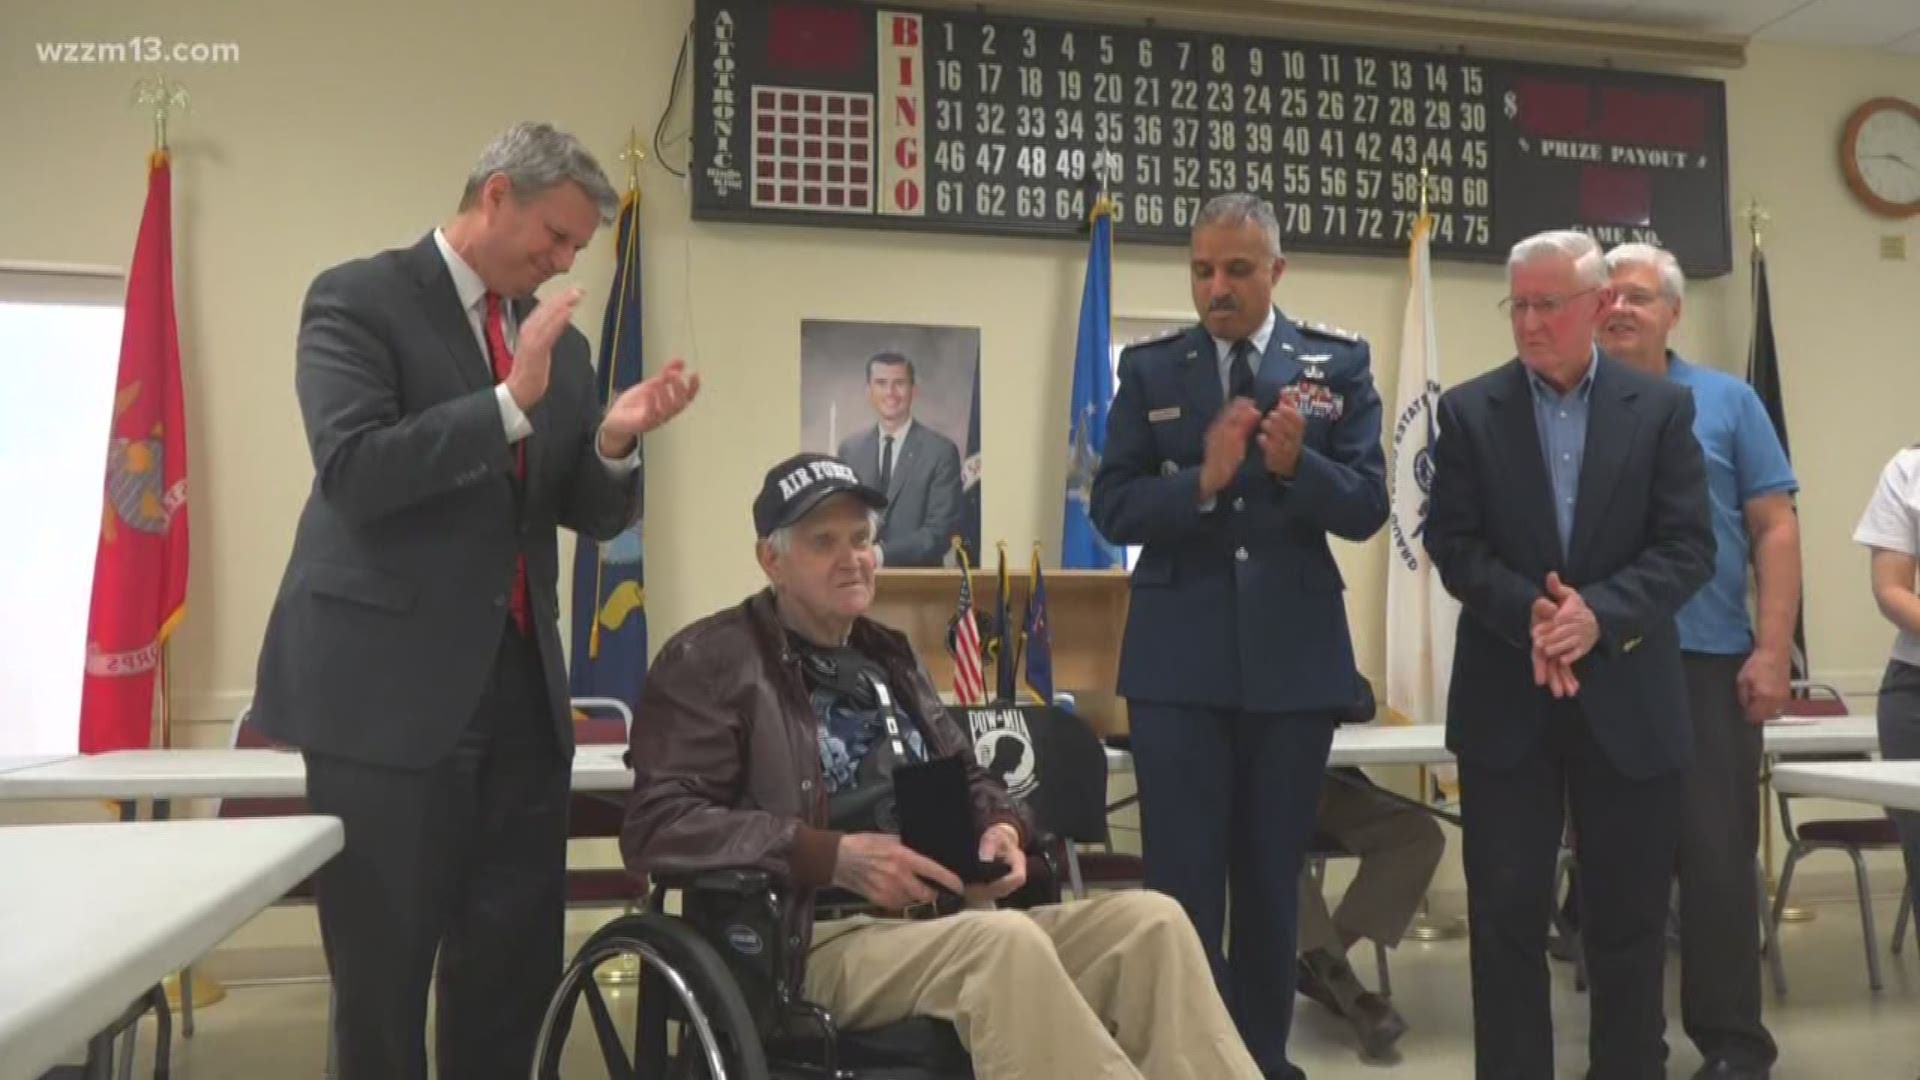 Congressional medals awarded to Michigan father and son